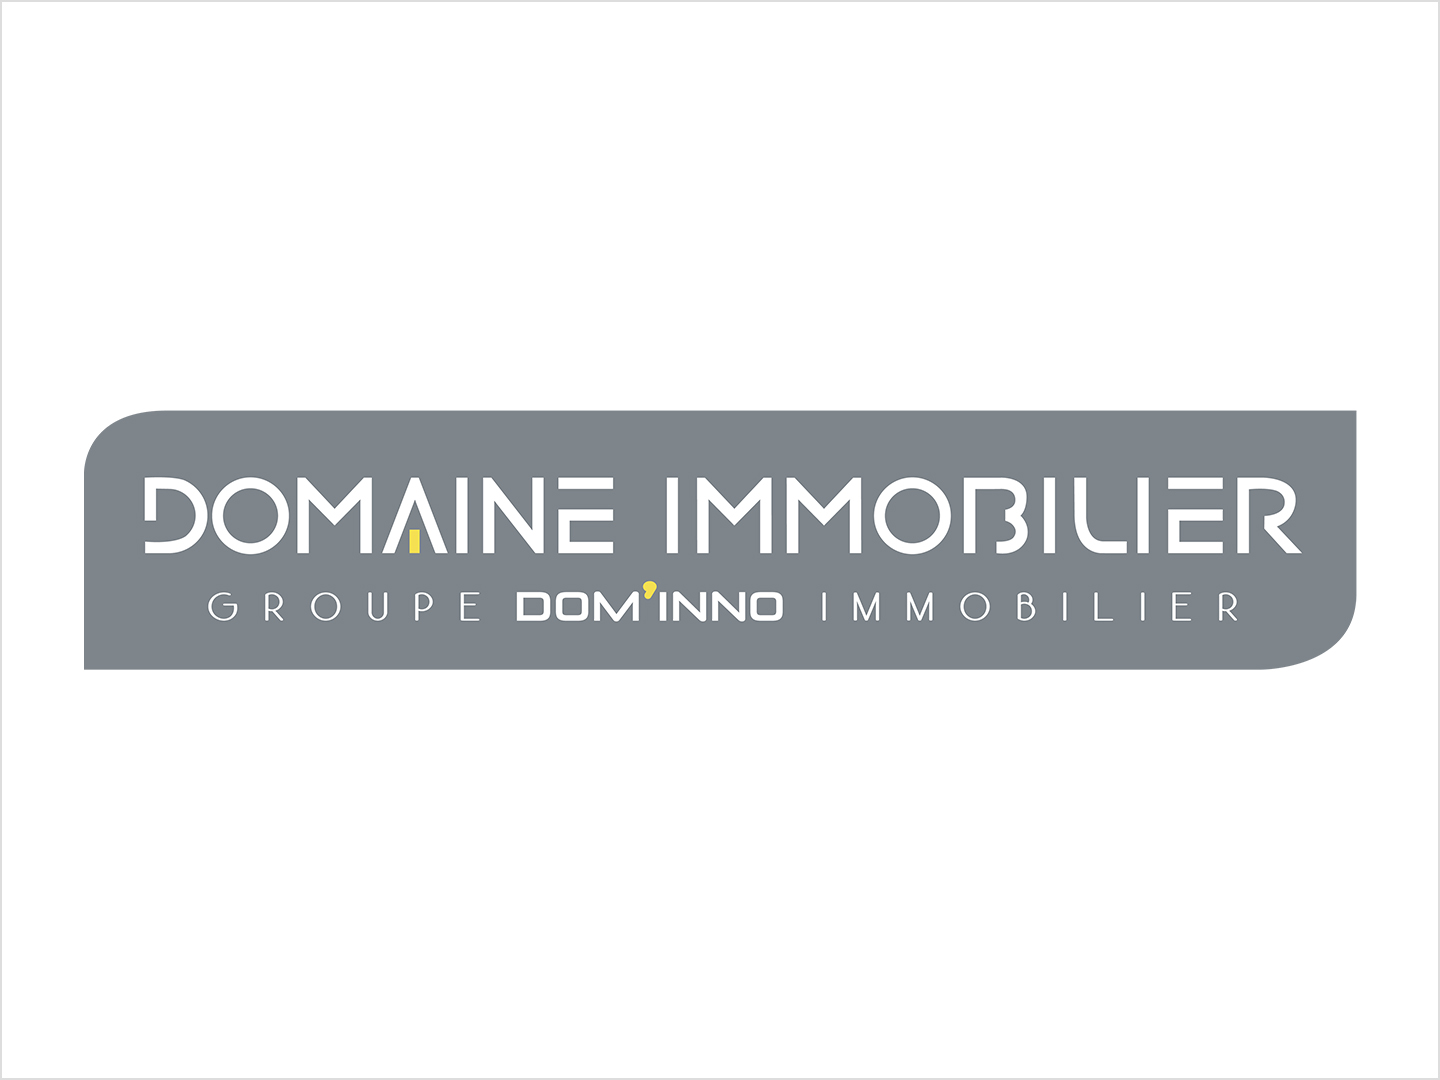 DOMAINE IMMOBILIER groupe DOM’INNO